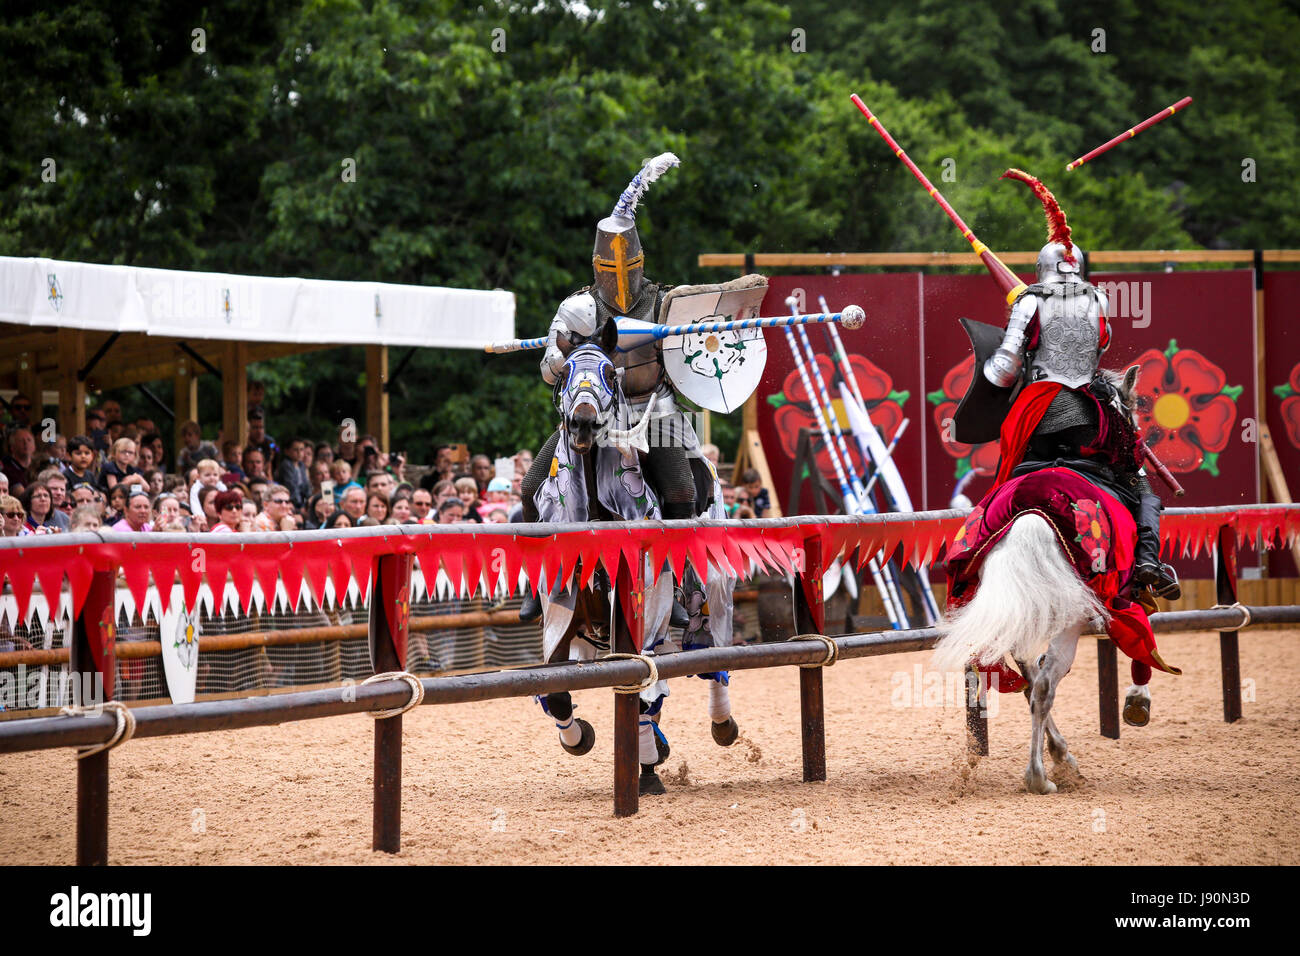 Warwick, UK. 30th May, 2017. An epic battle, it's 1455 and the House of Lancaster holds the English throne. King Henry VI's crown is challenged by the House of York. The rival houses clash in battle and the bloody war that ensued was to last over 30 years… Be one of the first to experience the story of the Wars of the Roses as it unfolds before you during a new live action show at Warwick Castle. Showing this May half term break from 27th May — 4th June. Credit: Shaun Fellows /Alamy Live News Stock Photo